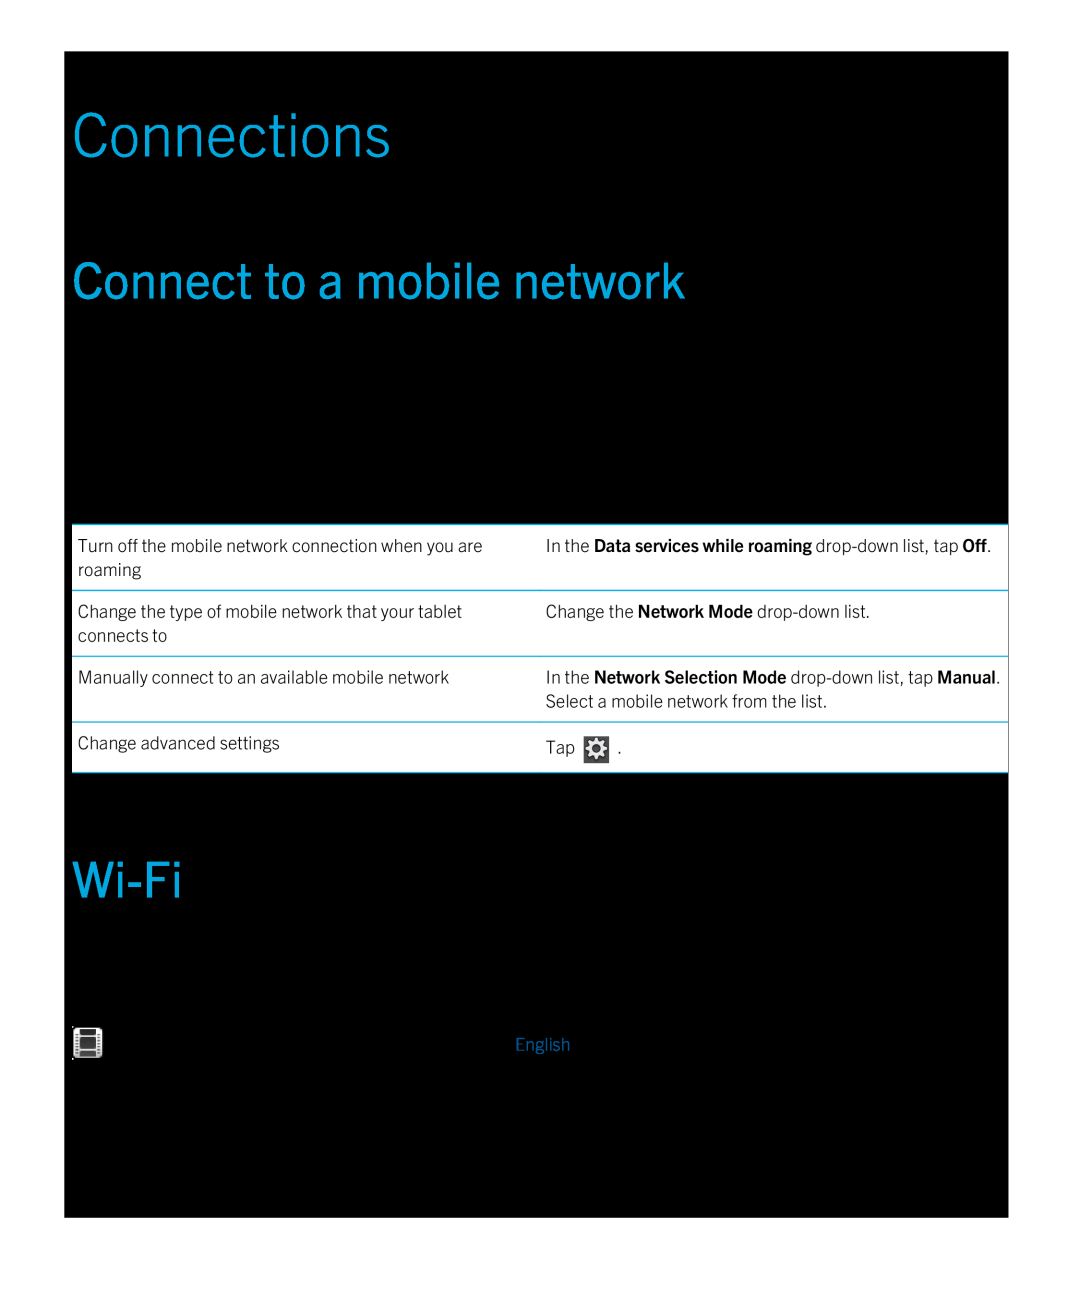 Blackberry 2.0.1 manual Connections, Connect to a mobile network, Connect to a Wi-Fi network, Tap Mobile Network 